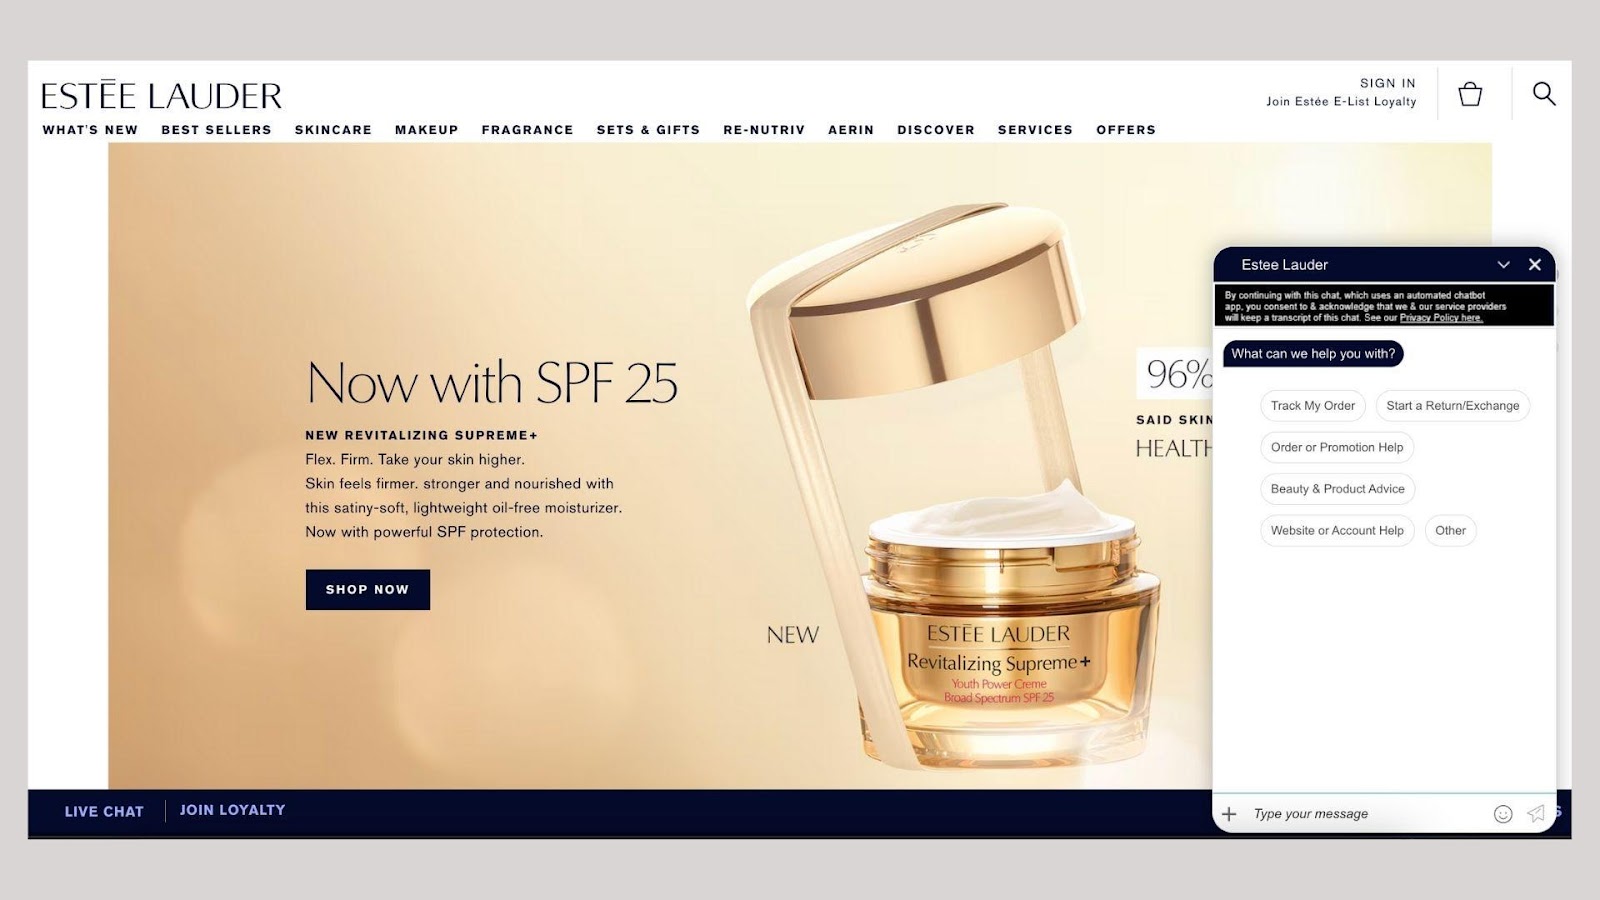 A screenshot from Estee Lauder’s website shows a conversation with its chatbot.